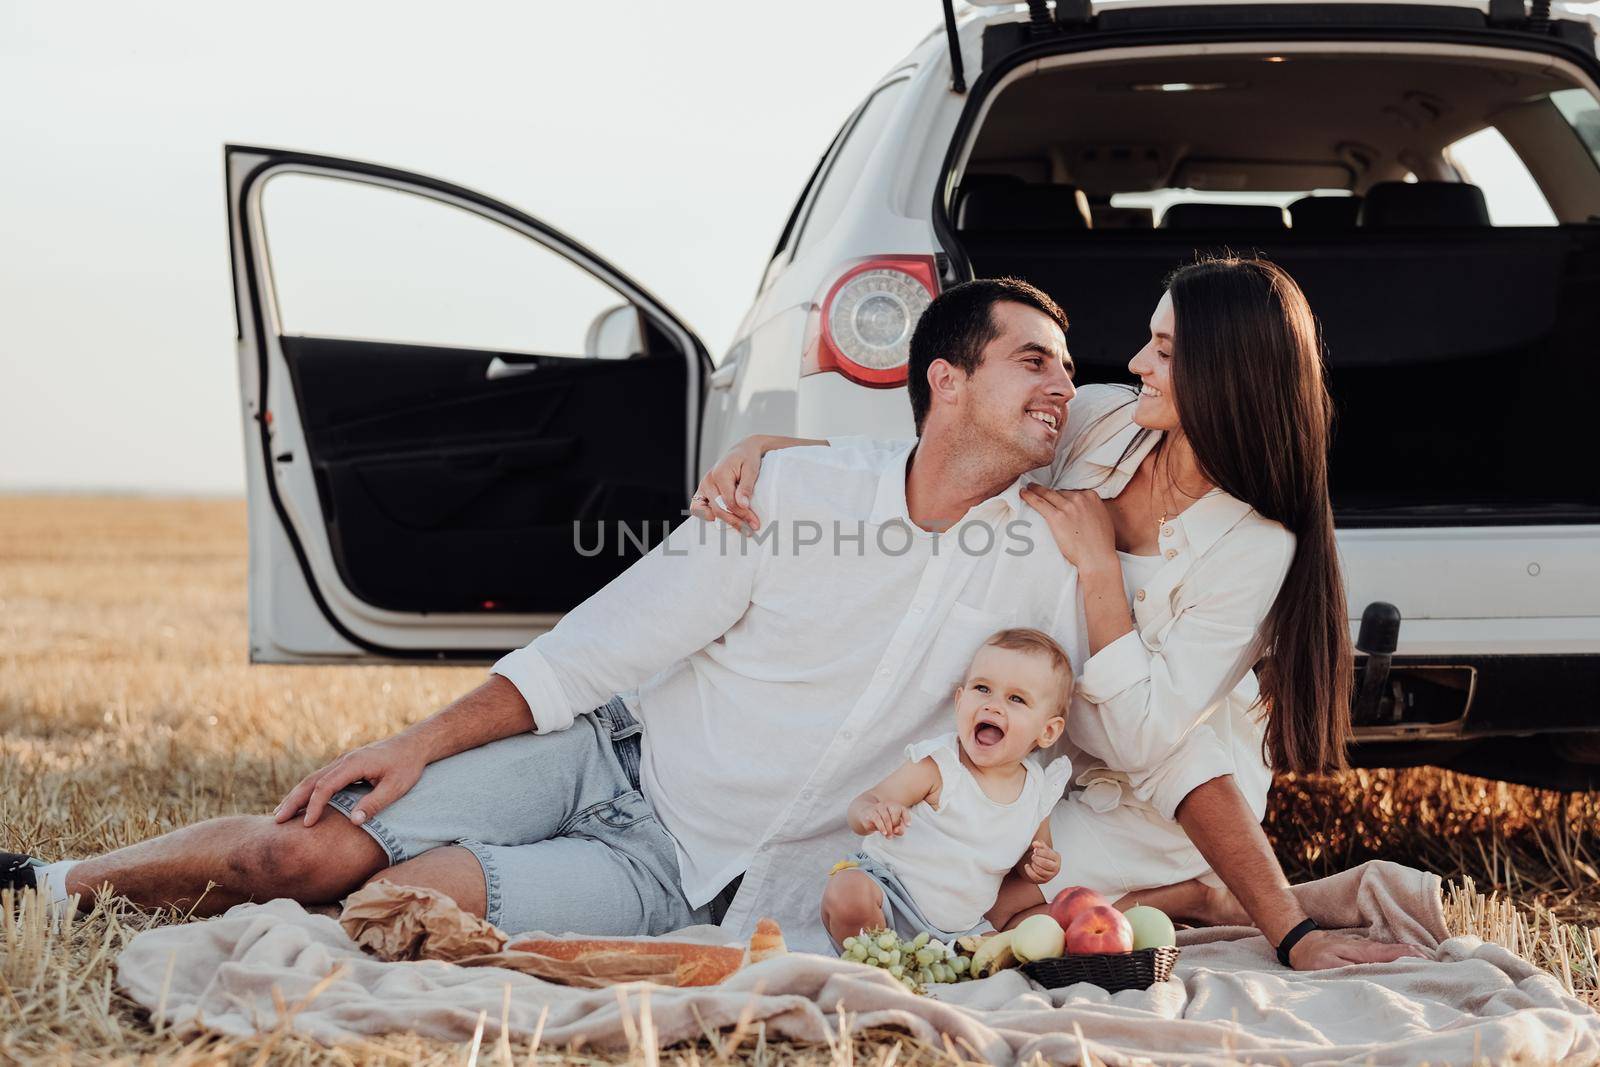 Smiling Young Family with Toddler Child Having Picnic Outside the City, Mom and Dad with Their Daughter Dressed Alike Sitting Near Car Outdoors